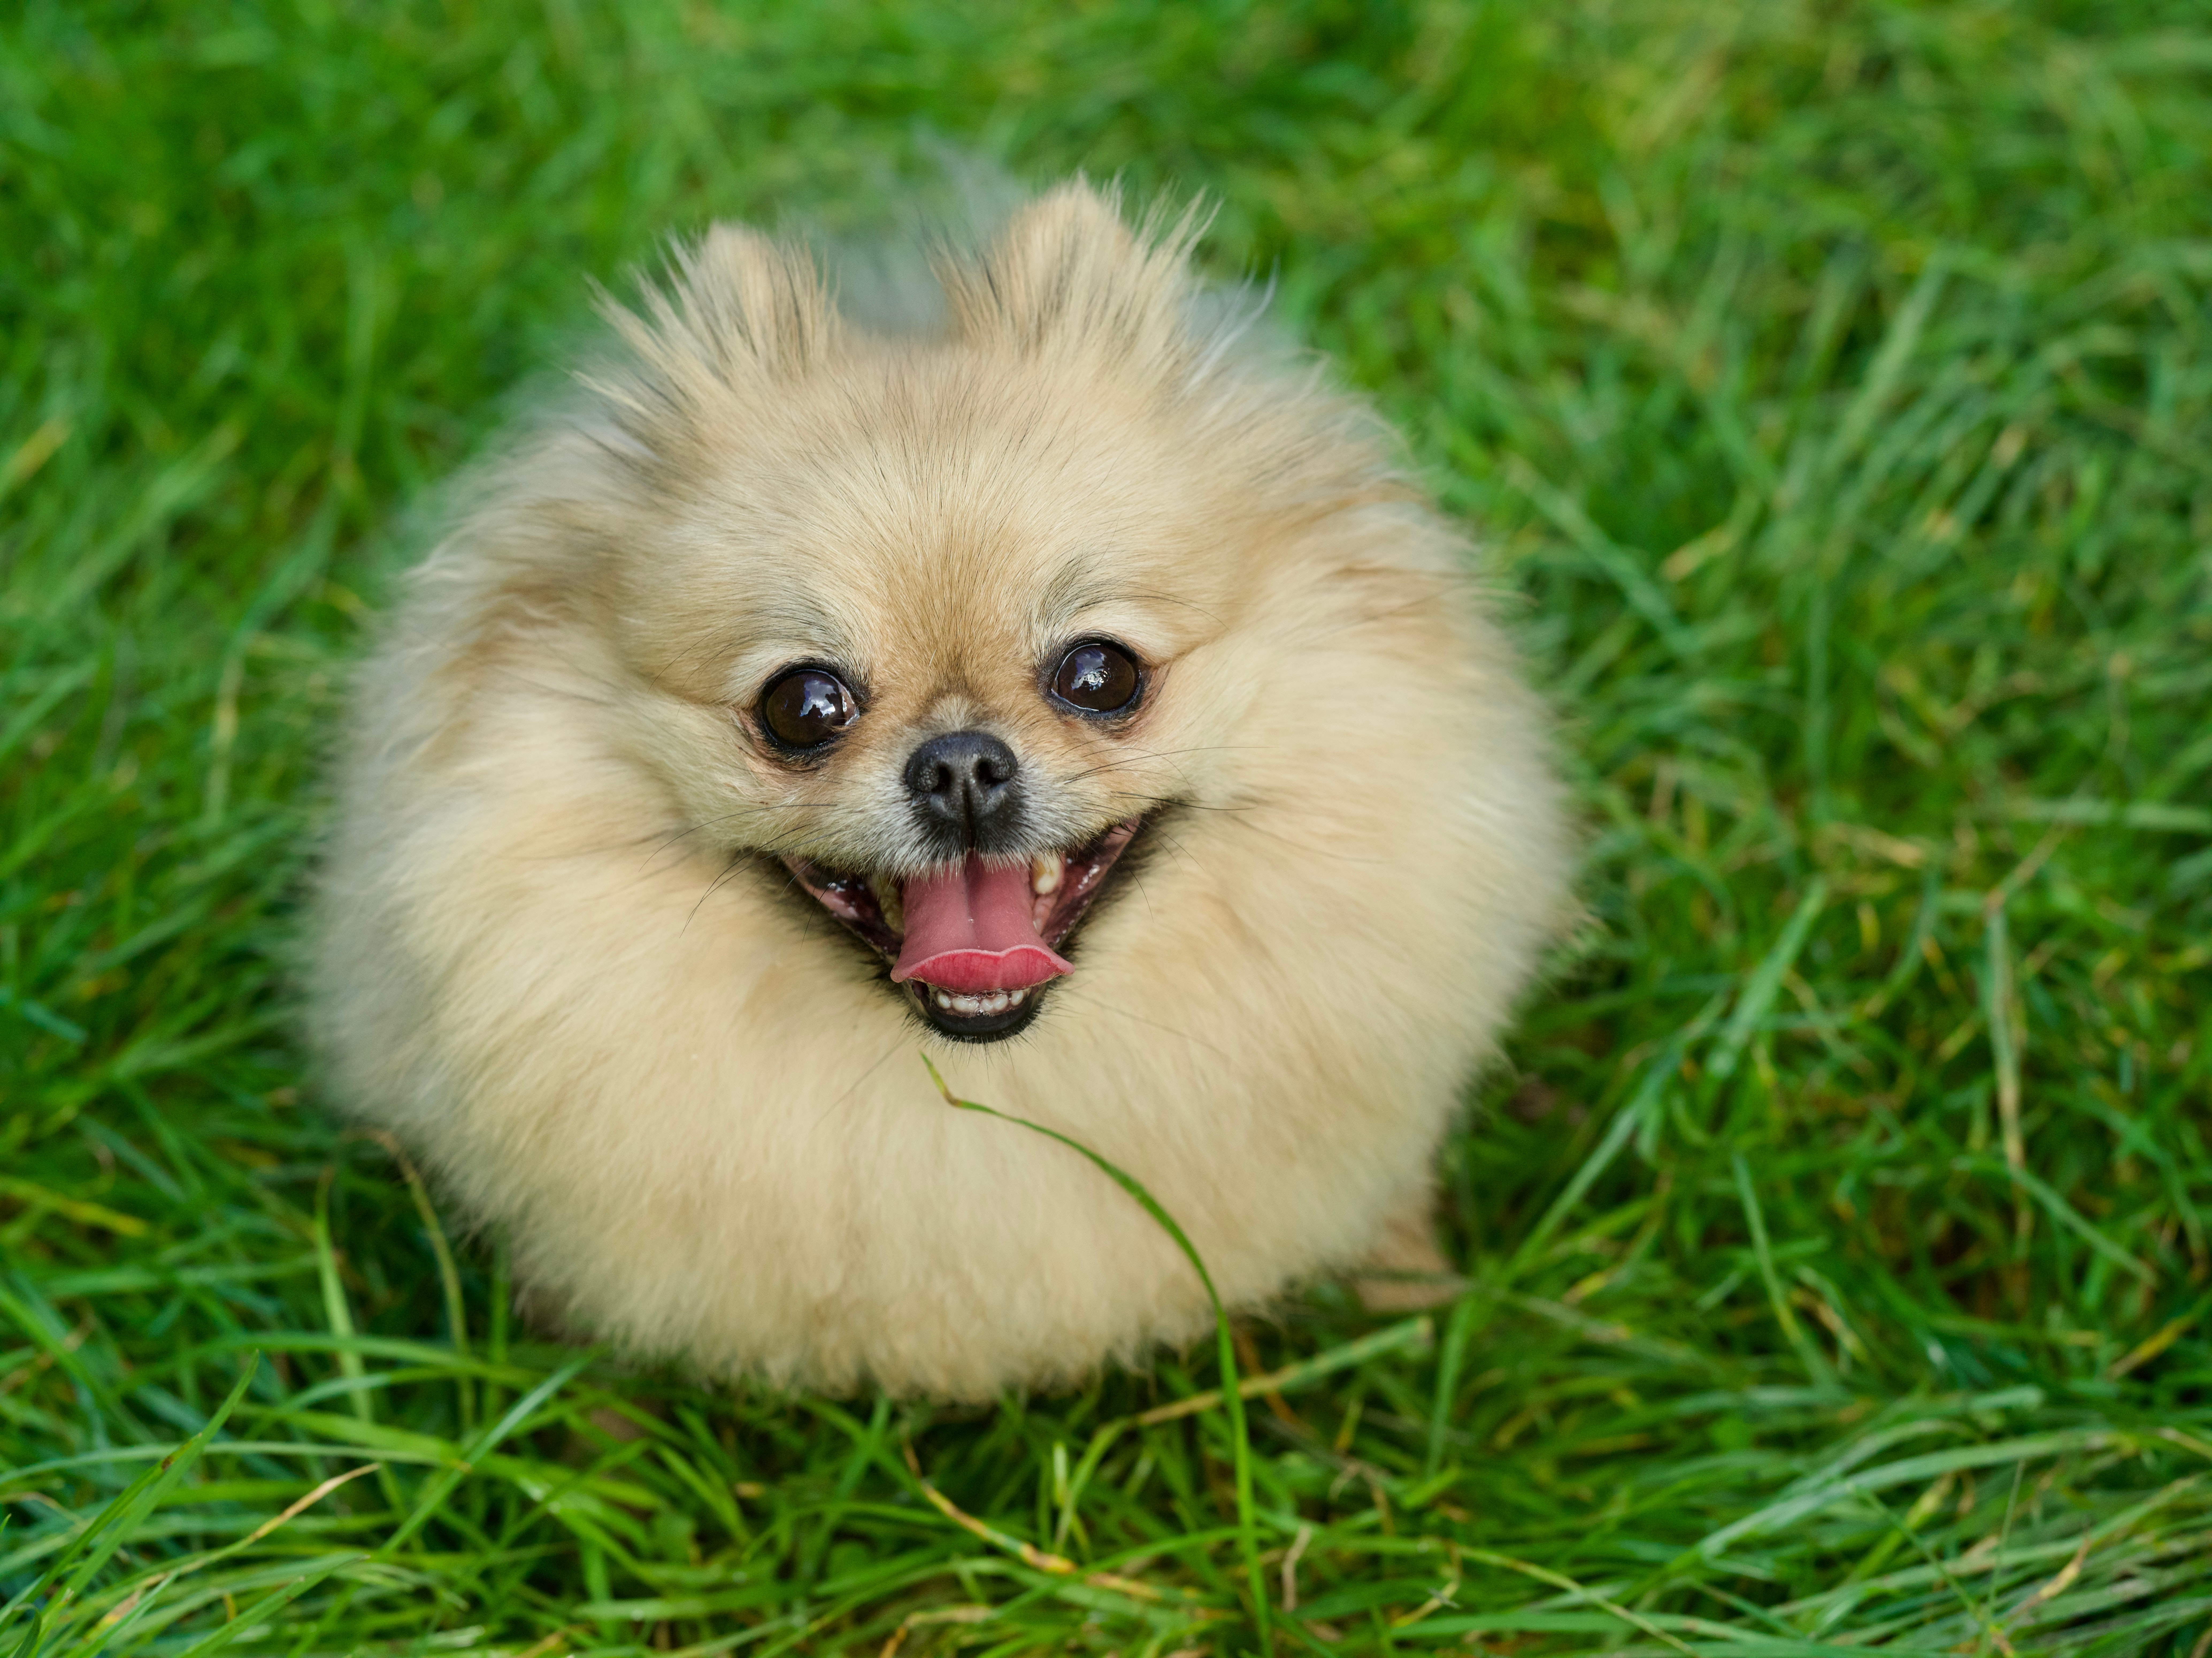 Pomeranian in the sit position